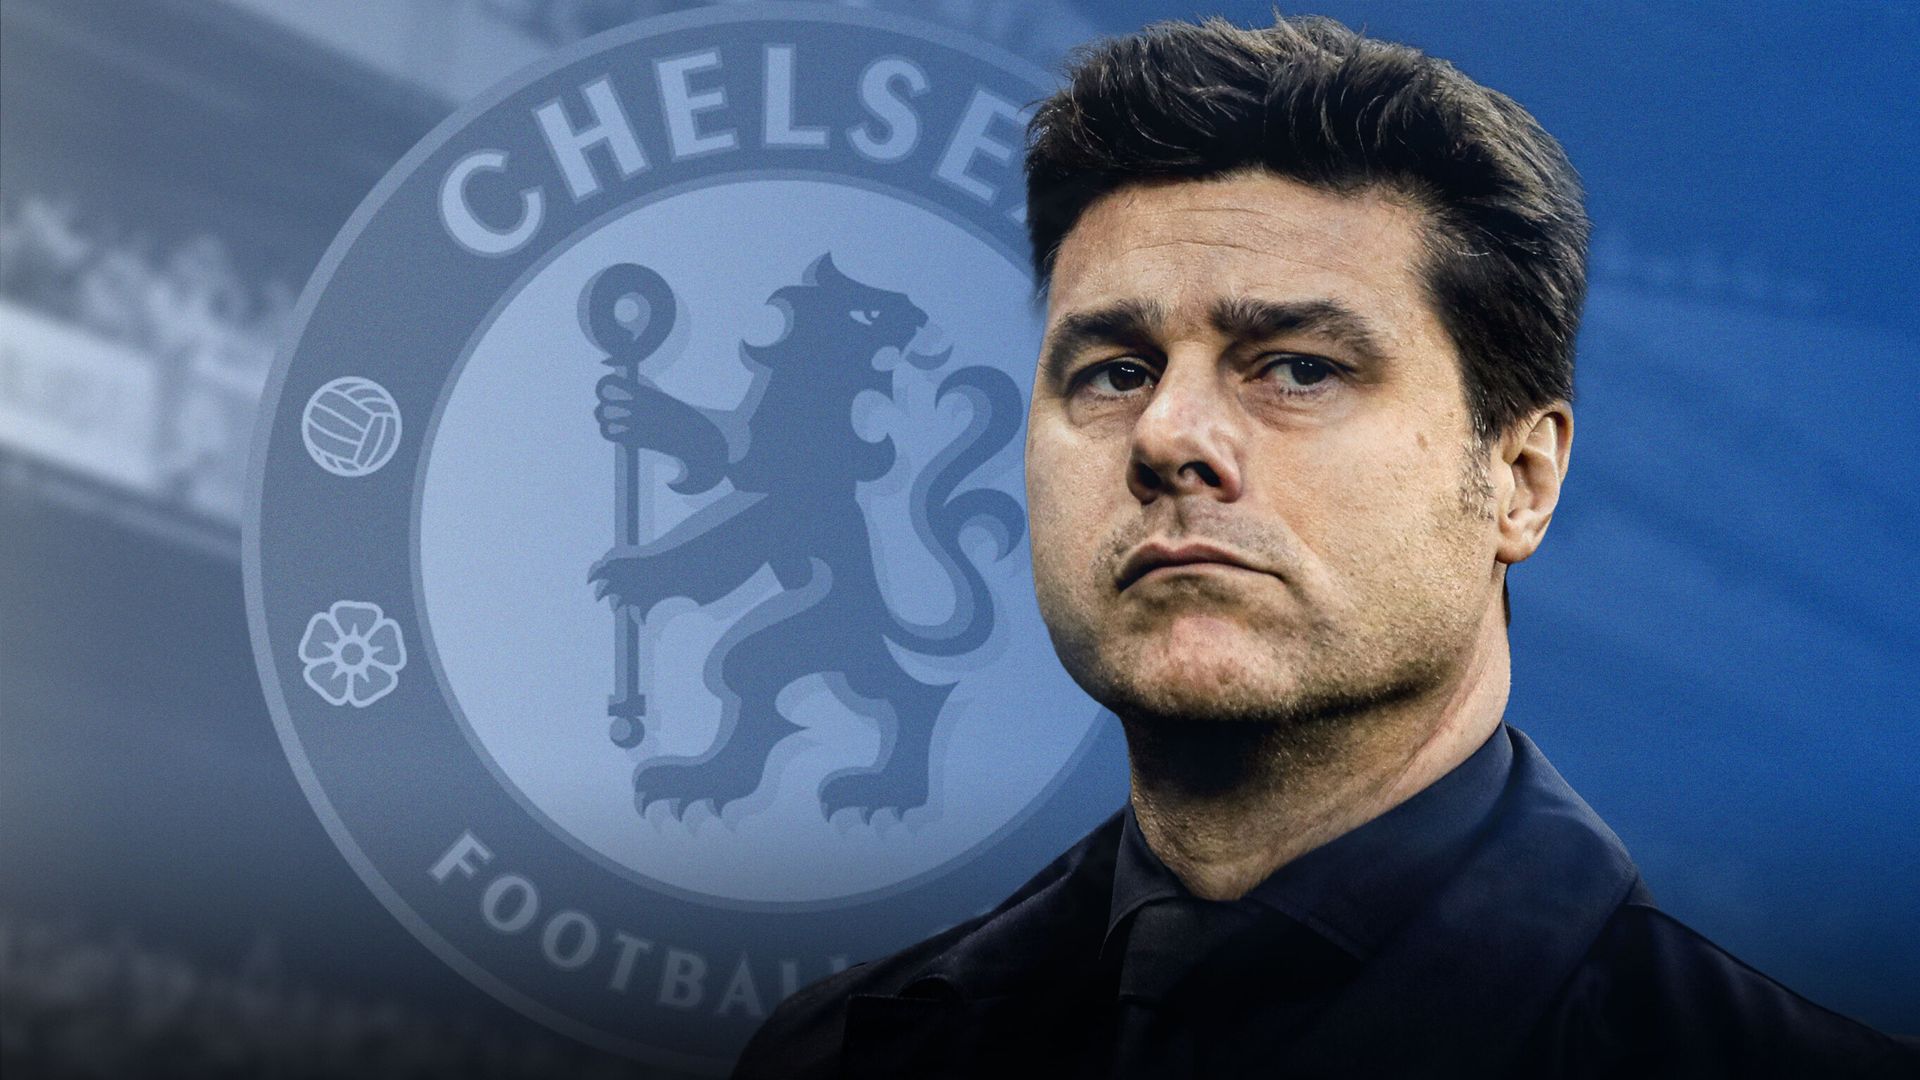 Podcast: Why Chelsea and Pochettino are in 'perfect symmetry'